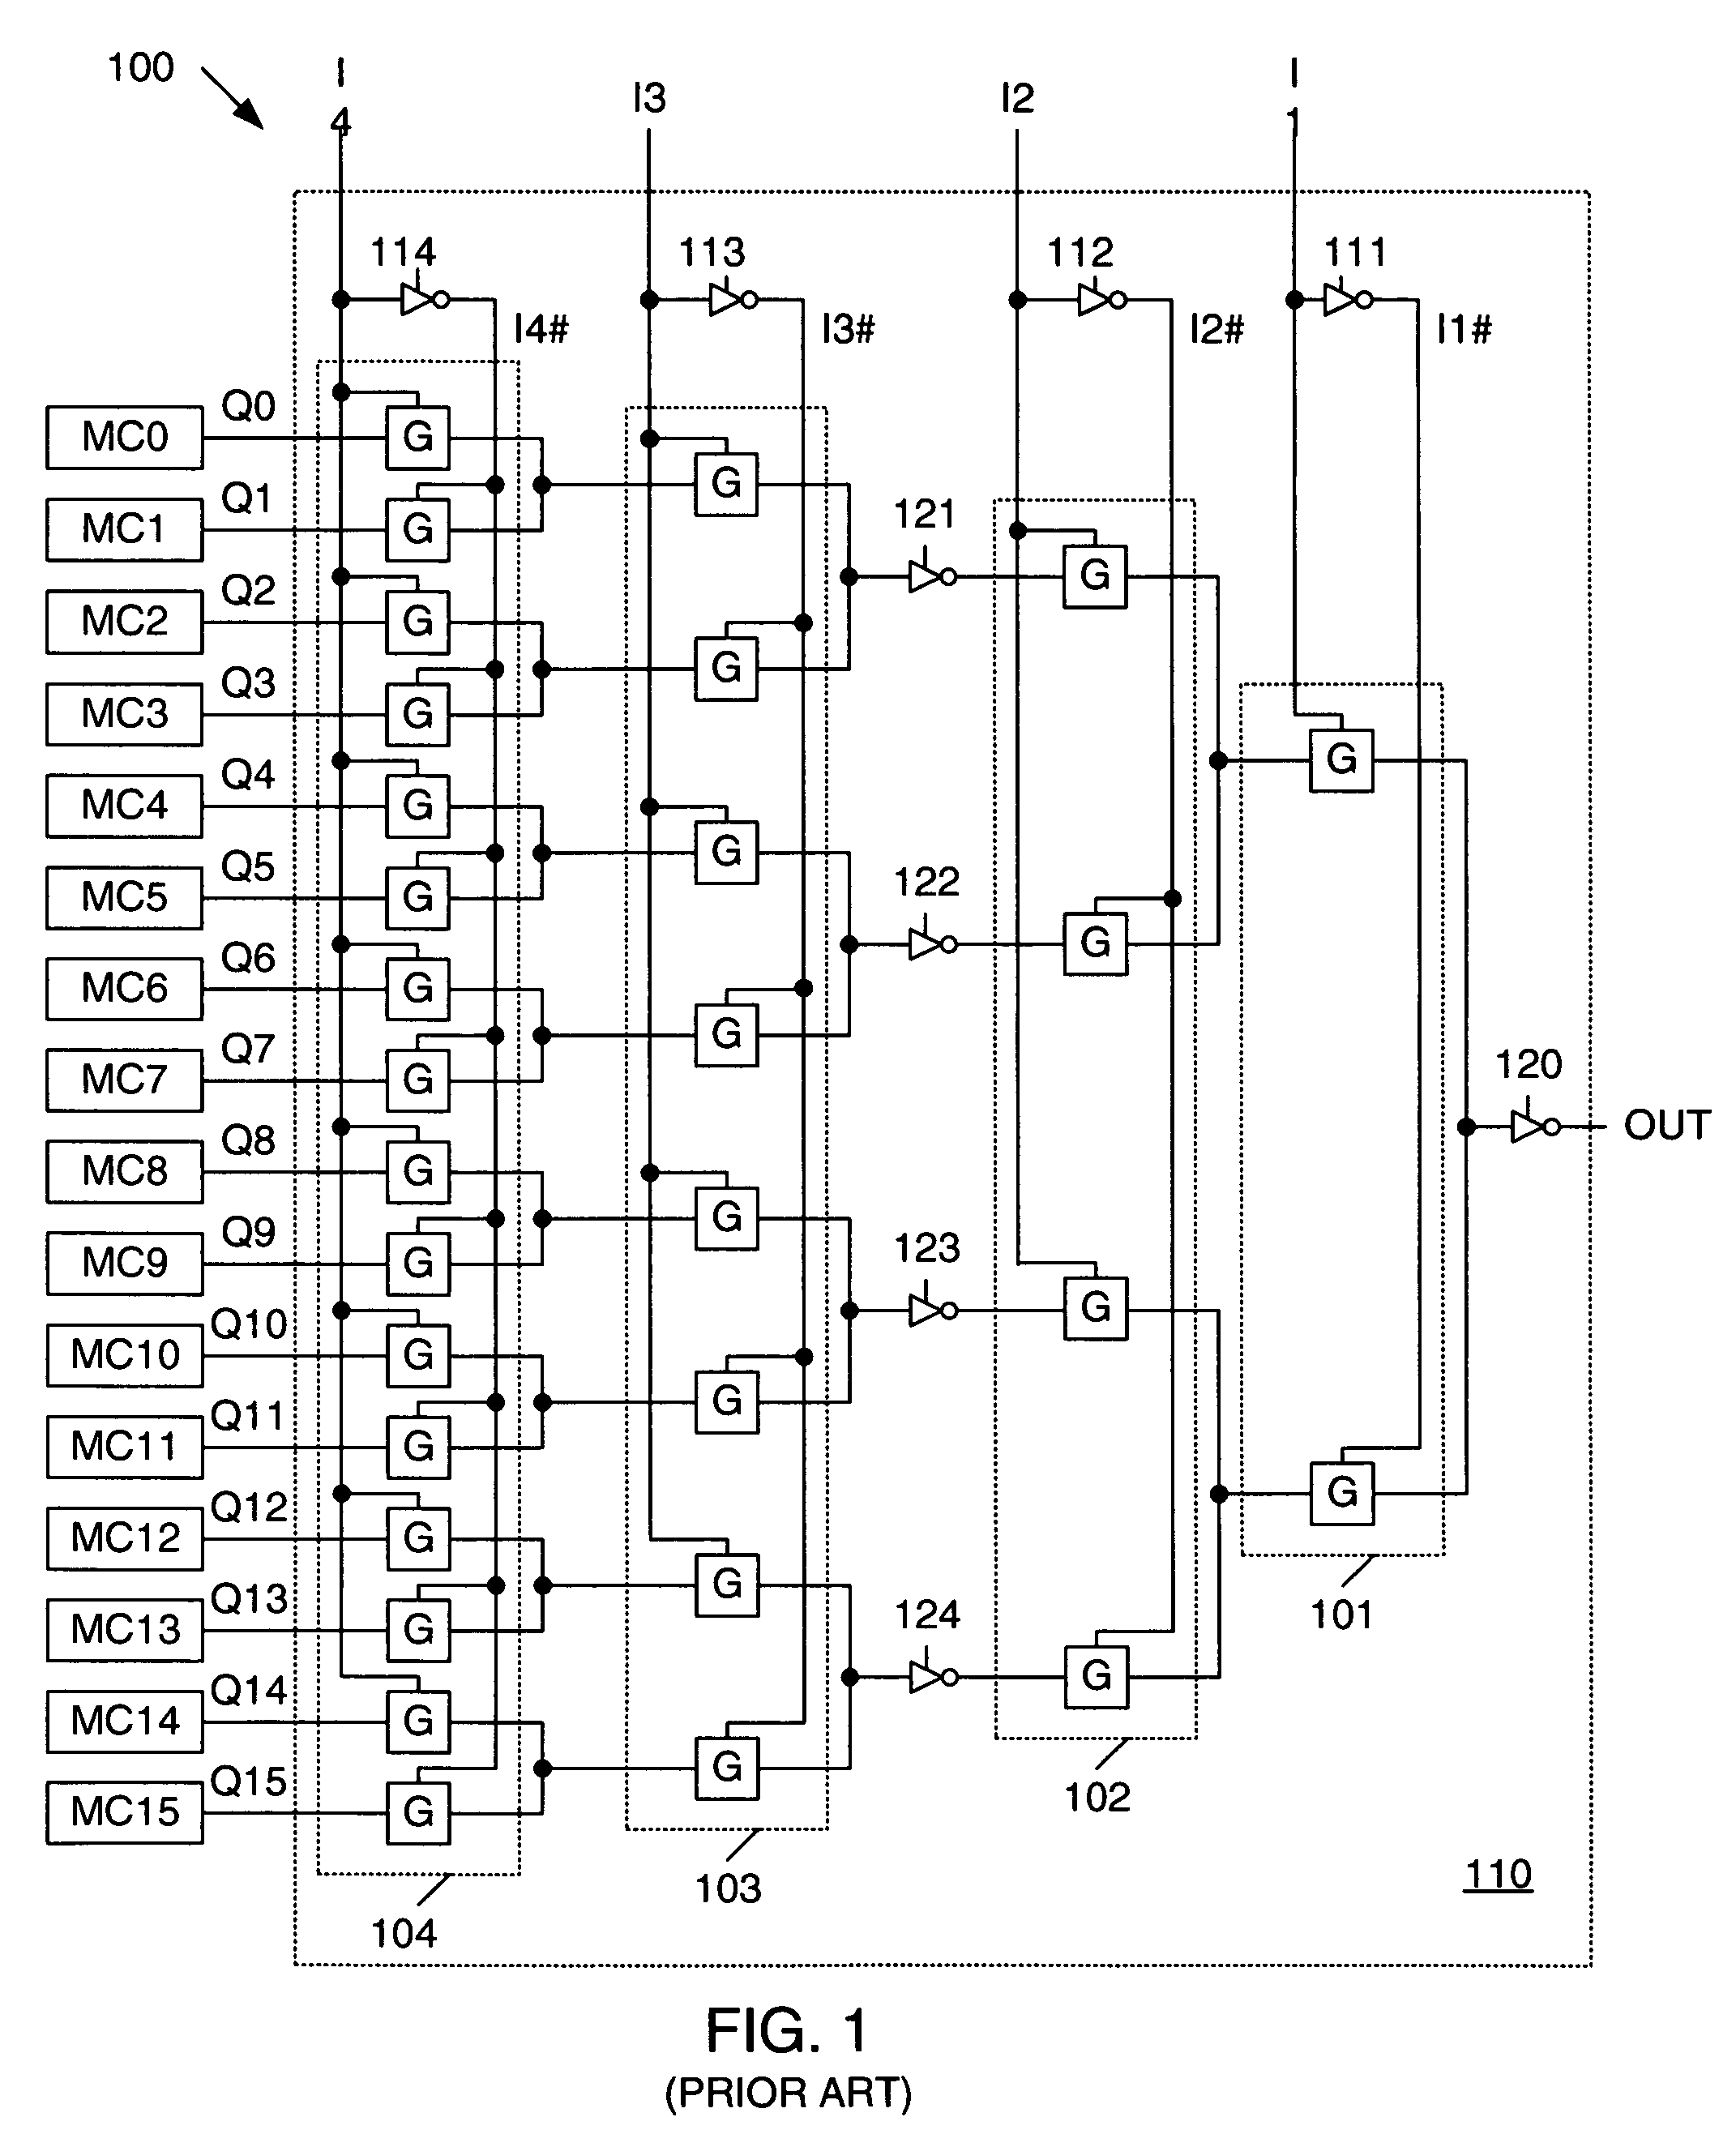 Six-input look-up table for use in a field programmable gate array